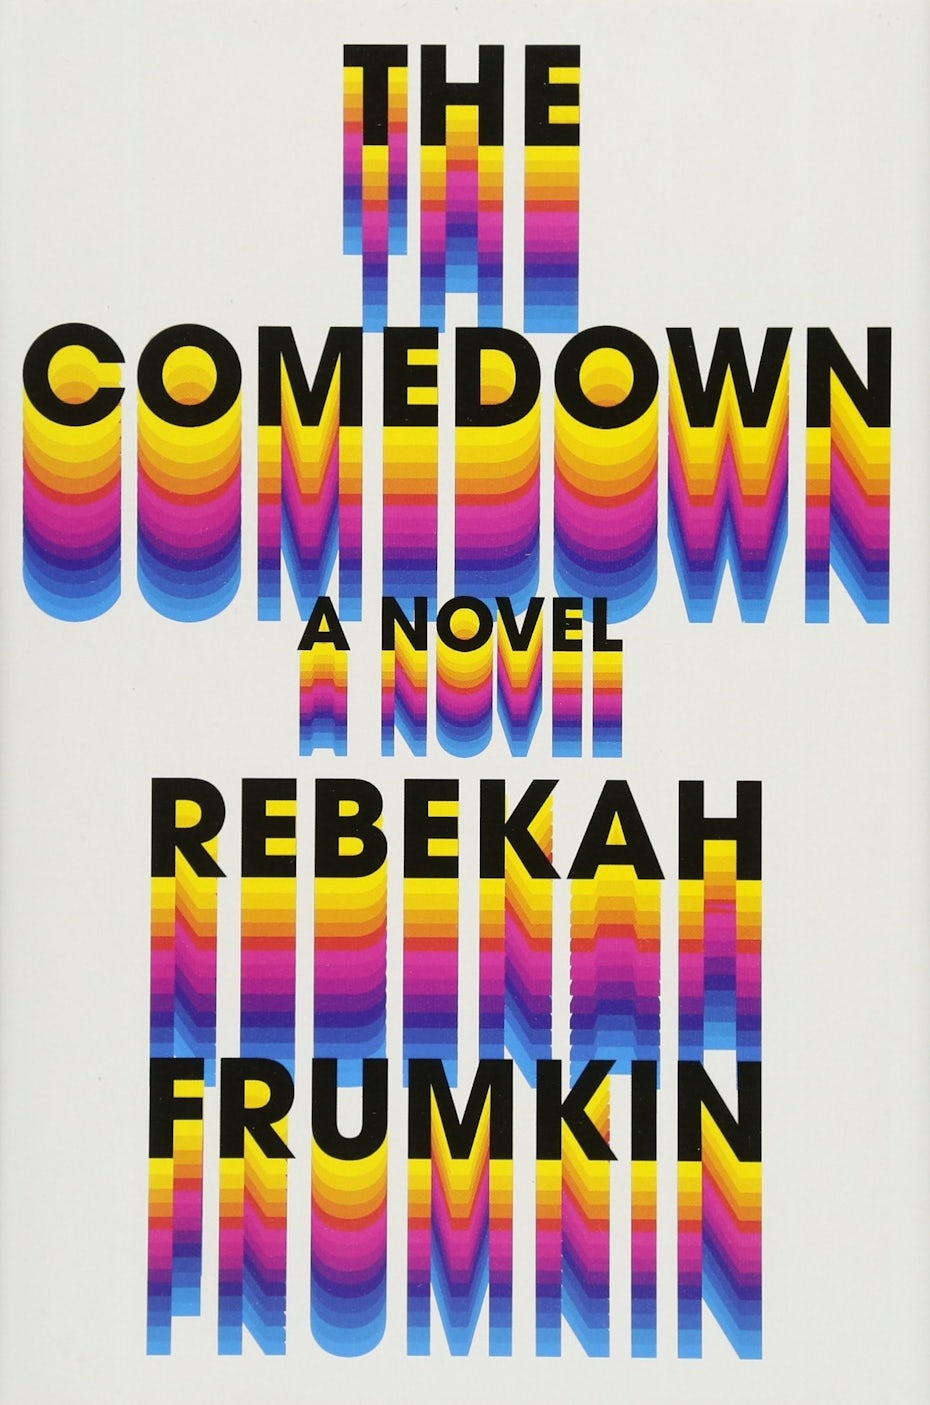 book cover trends 2020 example with 70s rainbow effect on letters